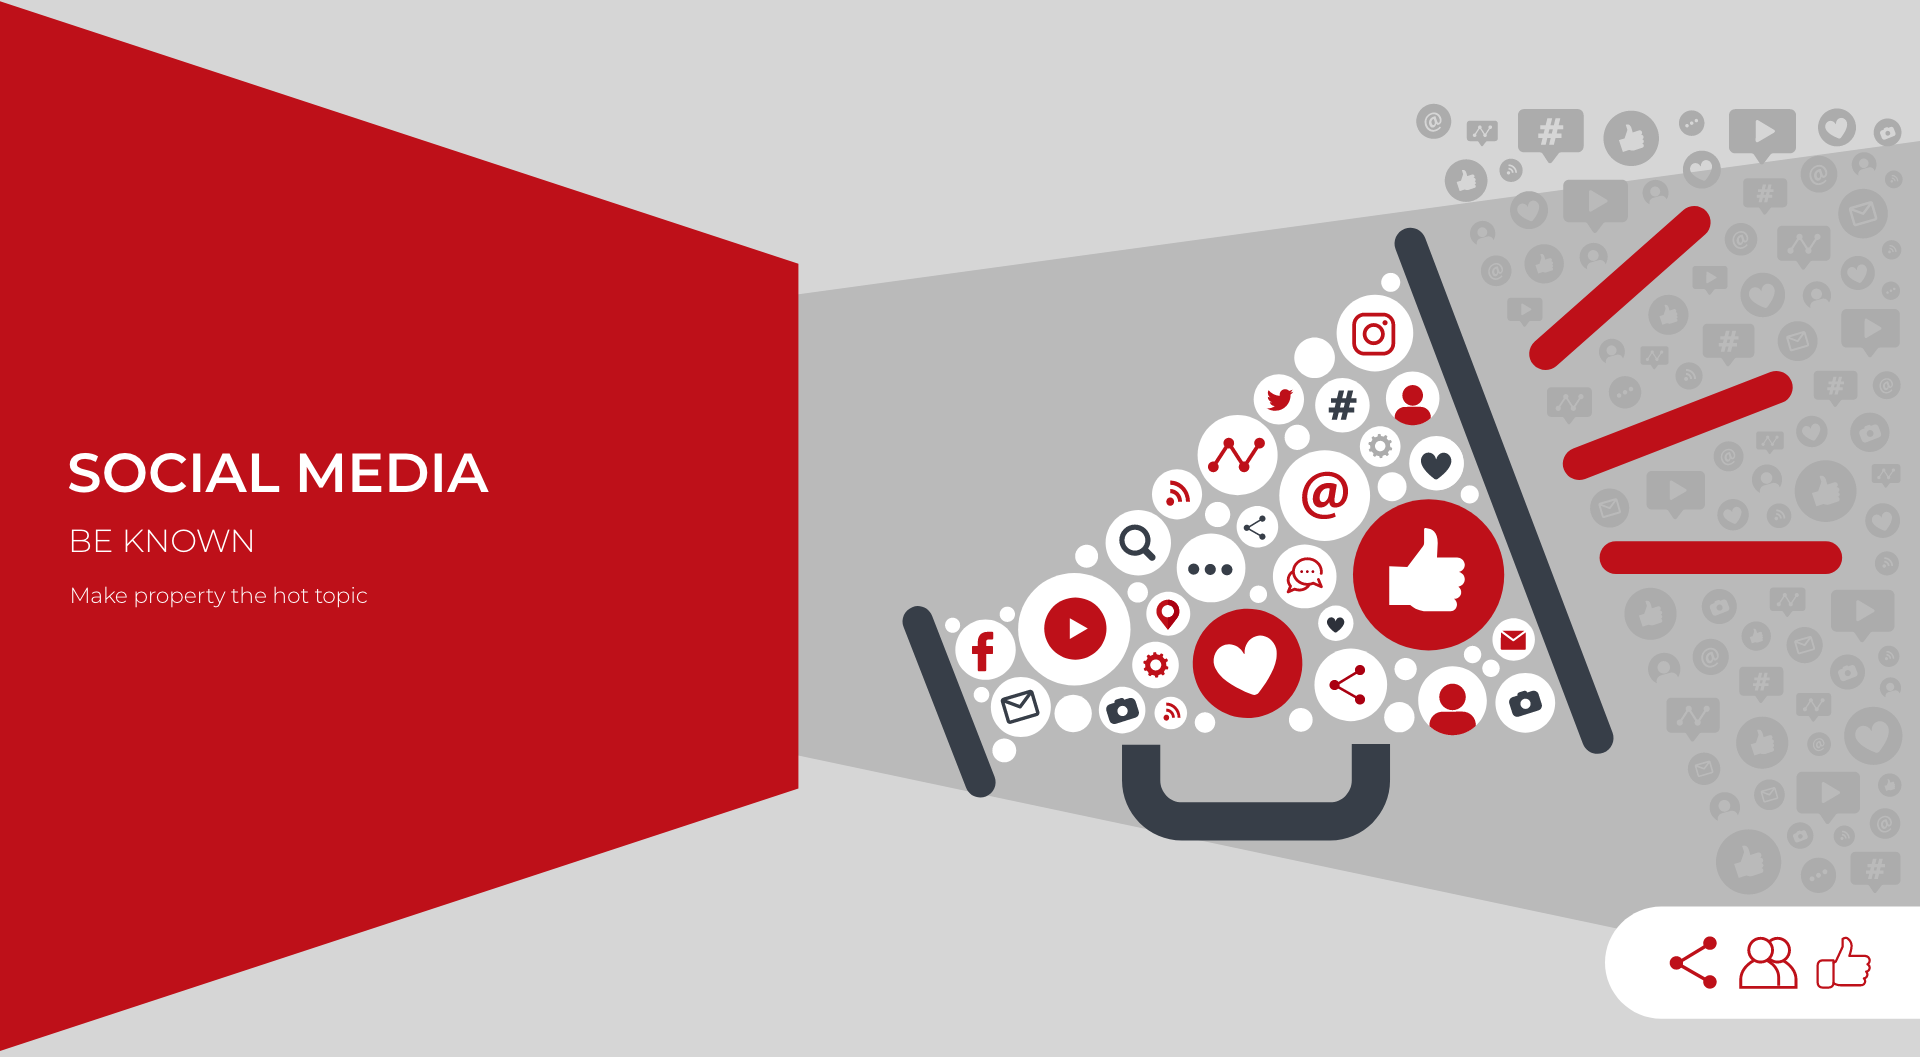 Banner image showing a graphic of a megaphone with various social media icons inside